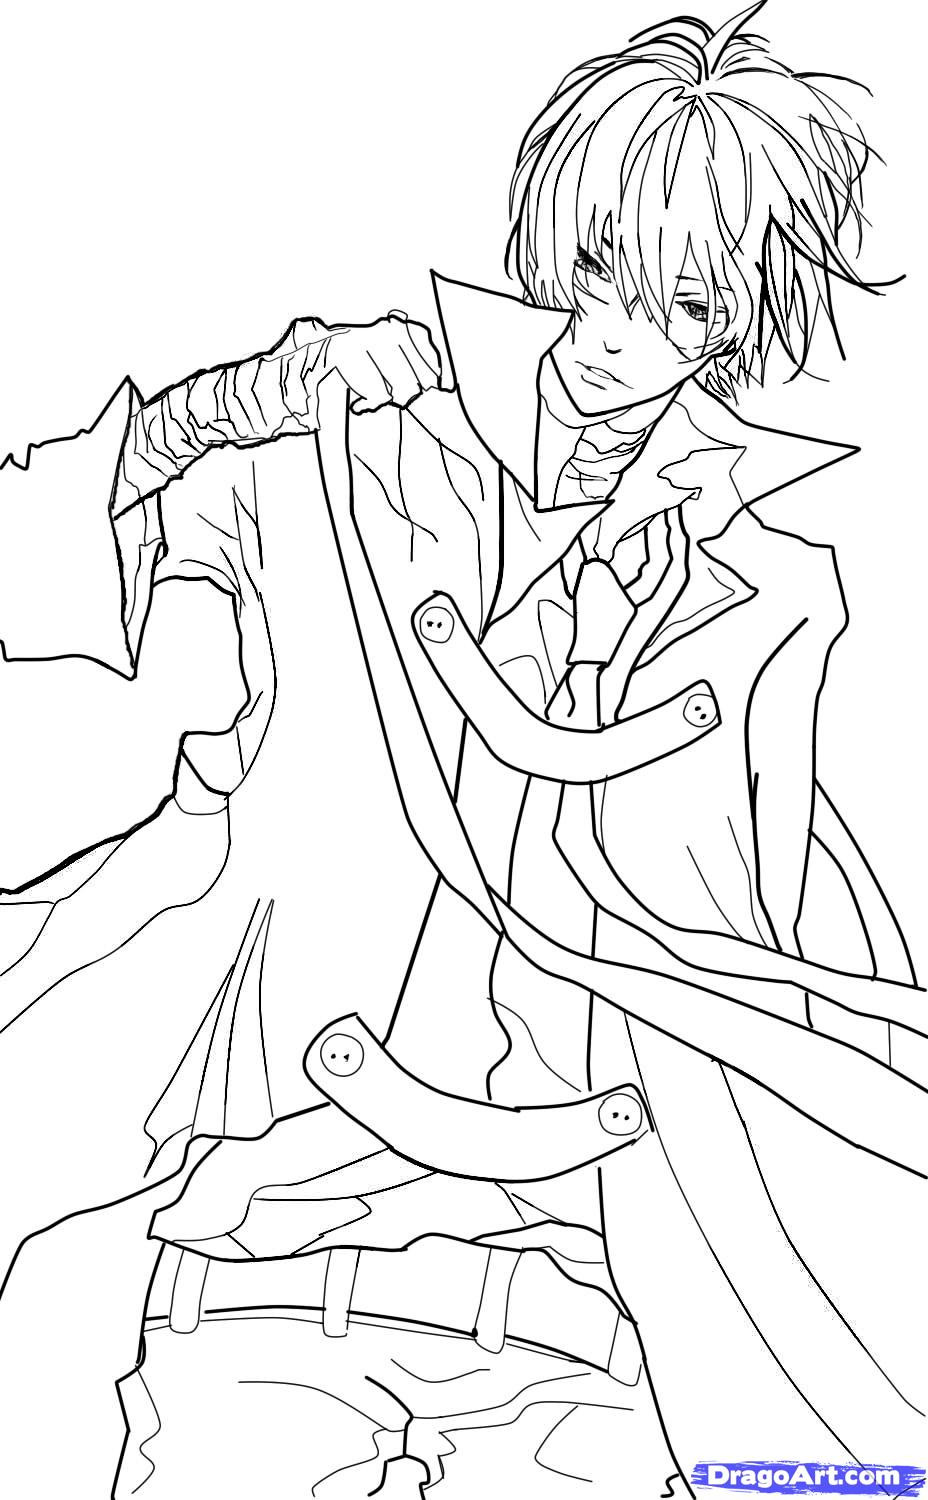 Anime Boys Coloring Pages
 art blog creating a killer skull